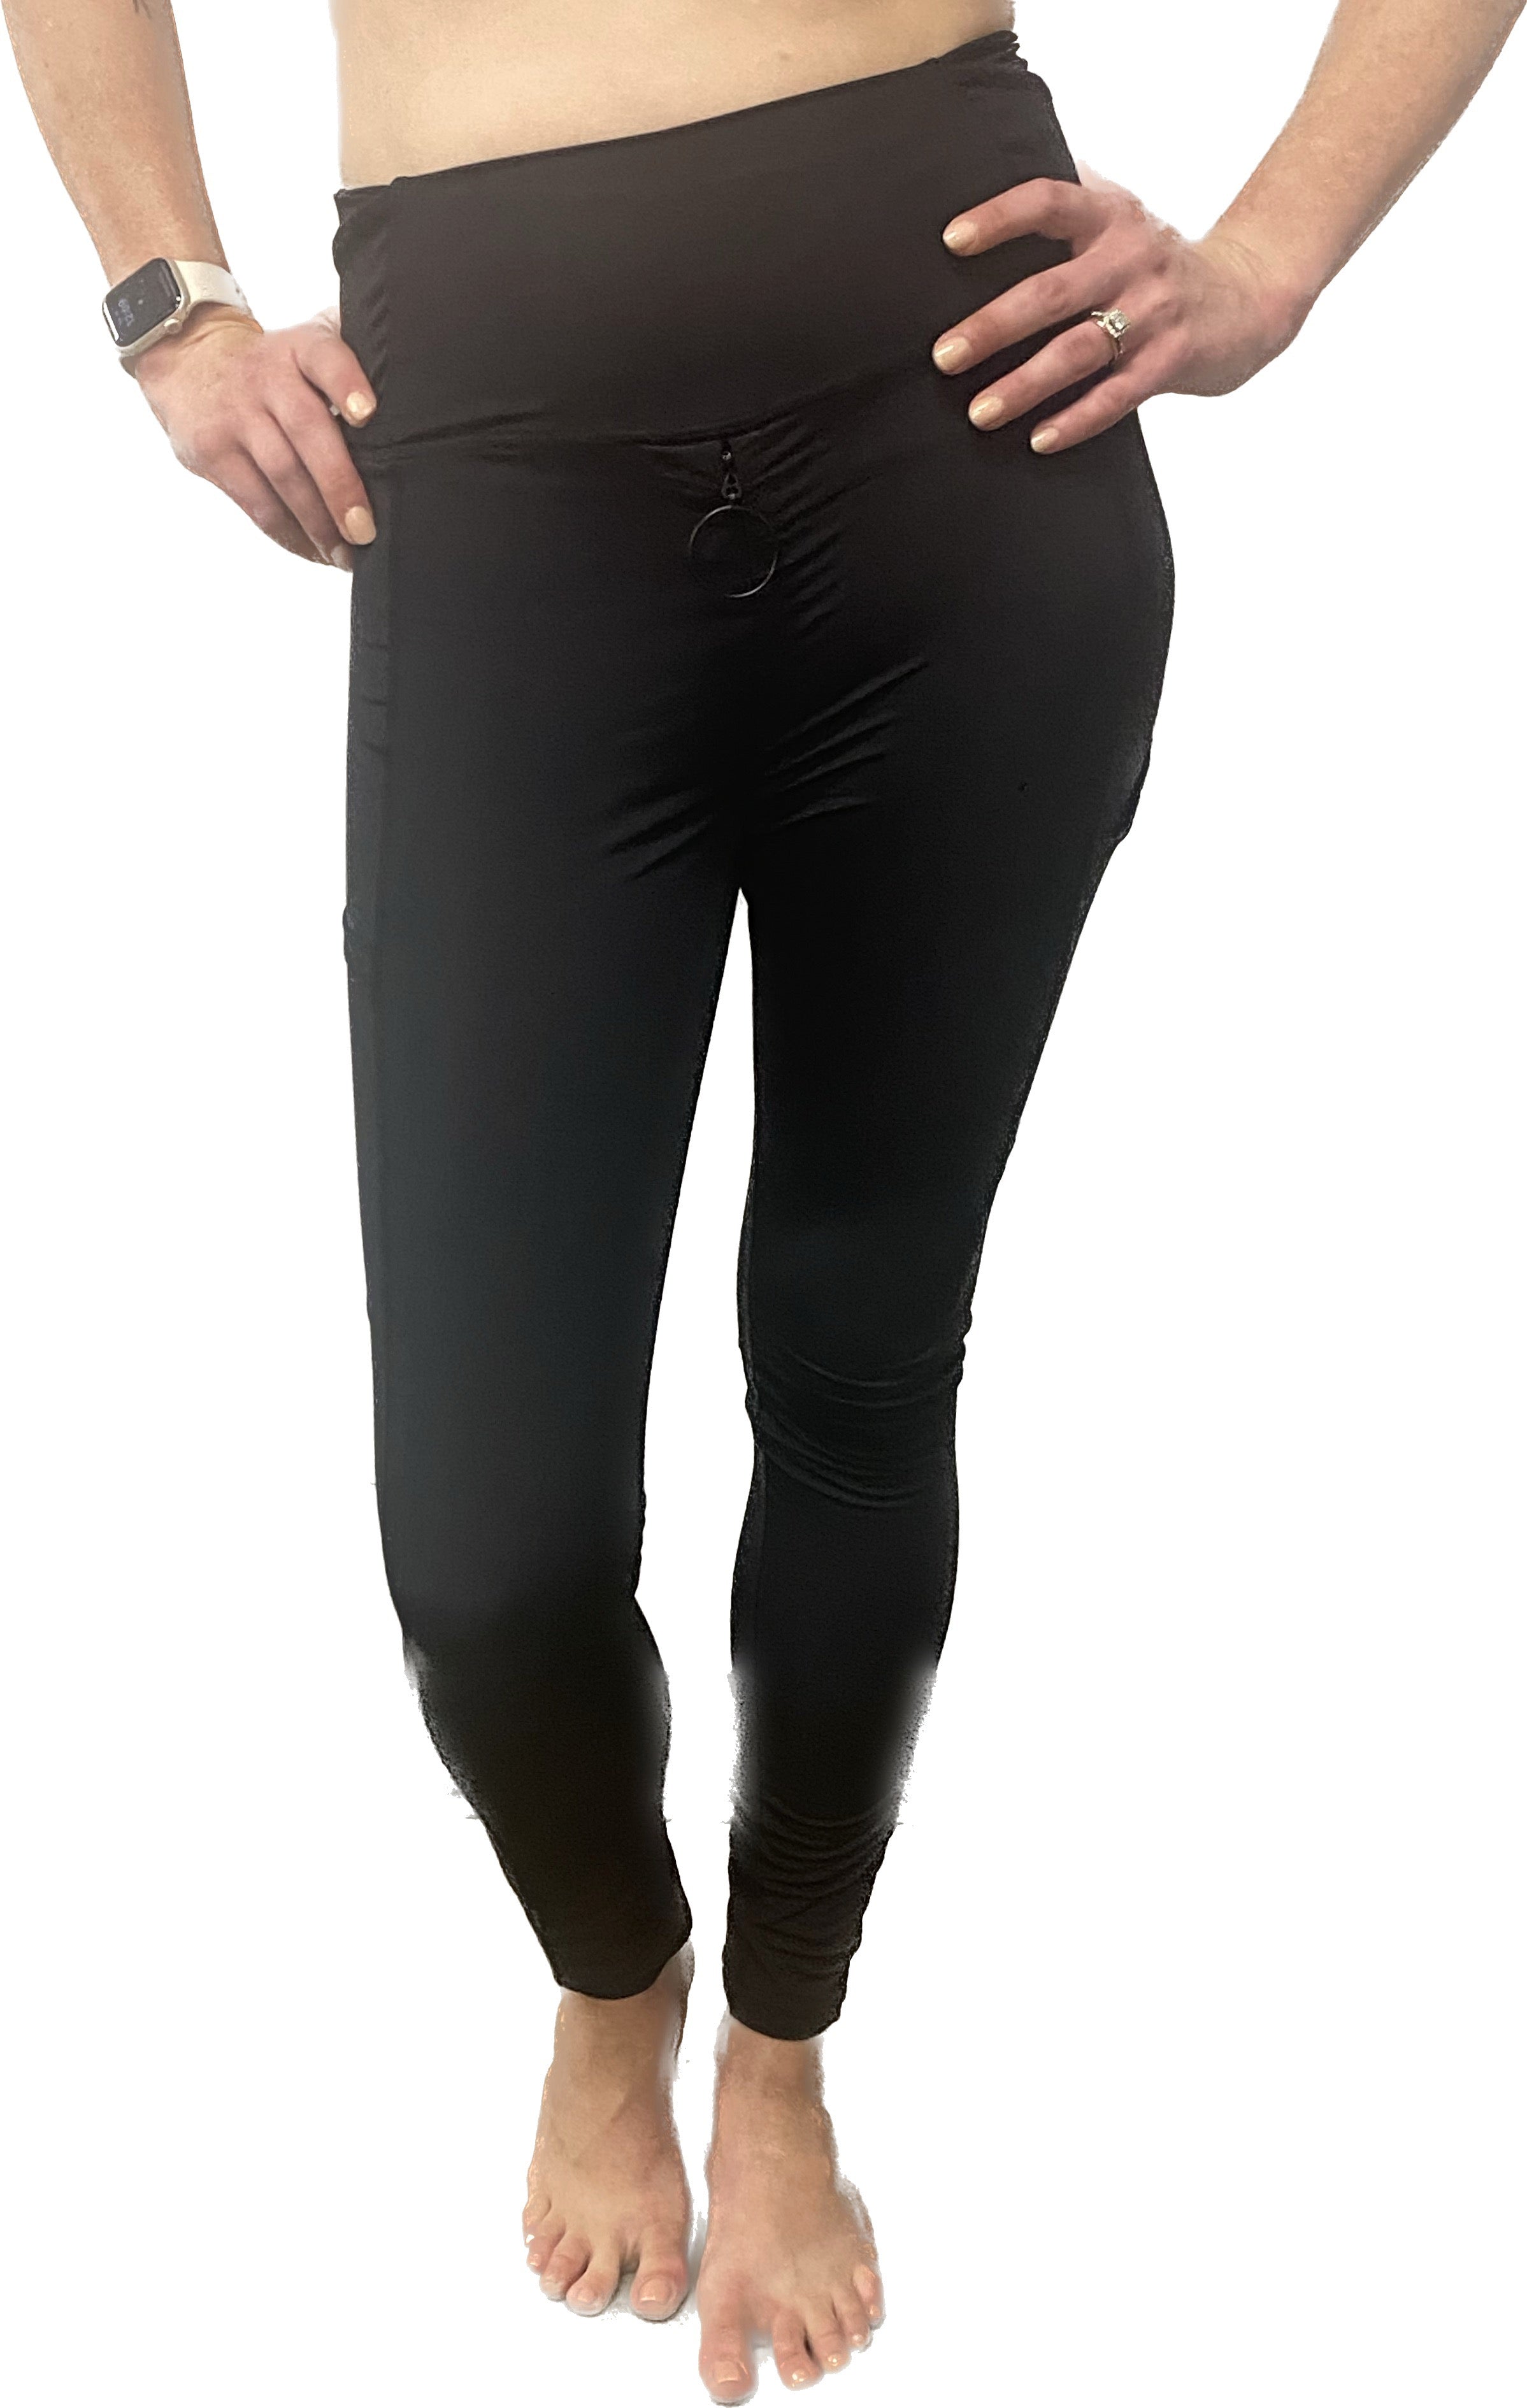 Fit & by ZIPHERS Leisure Elite Tights